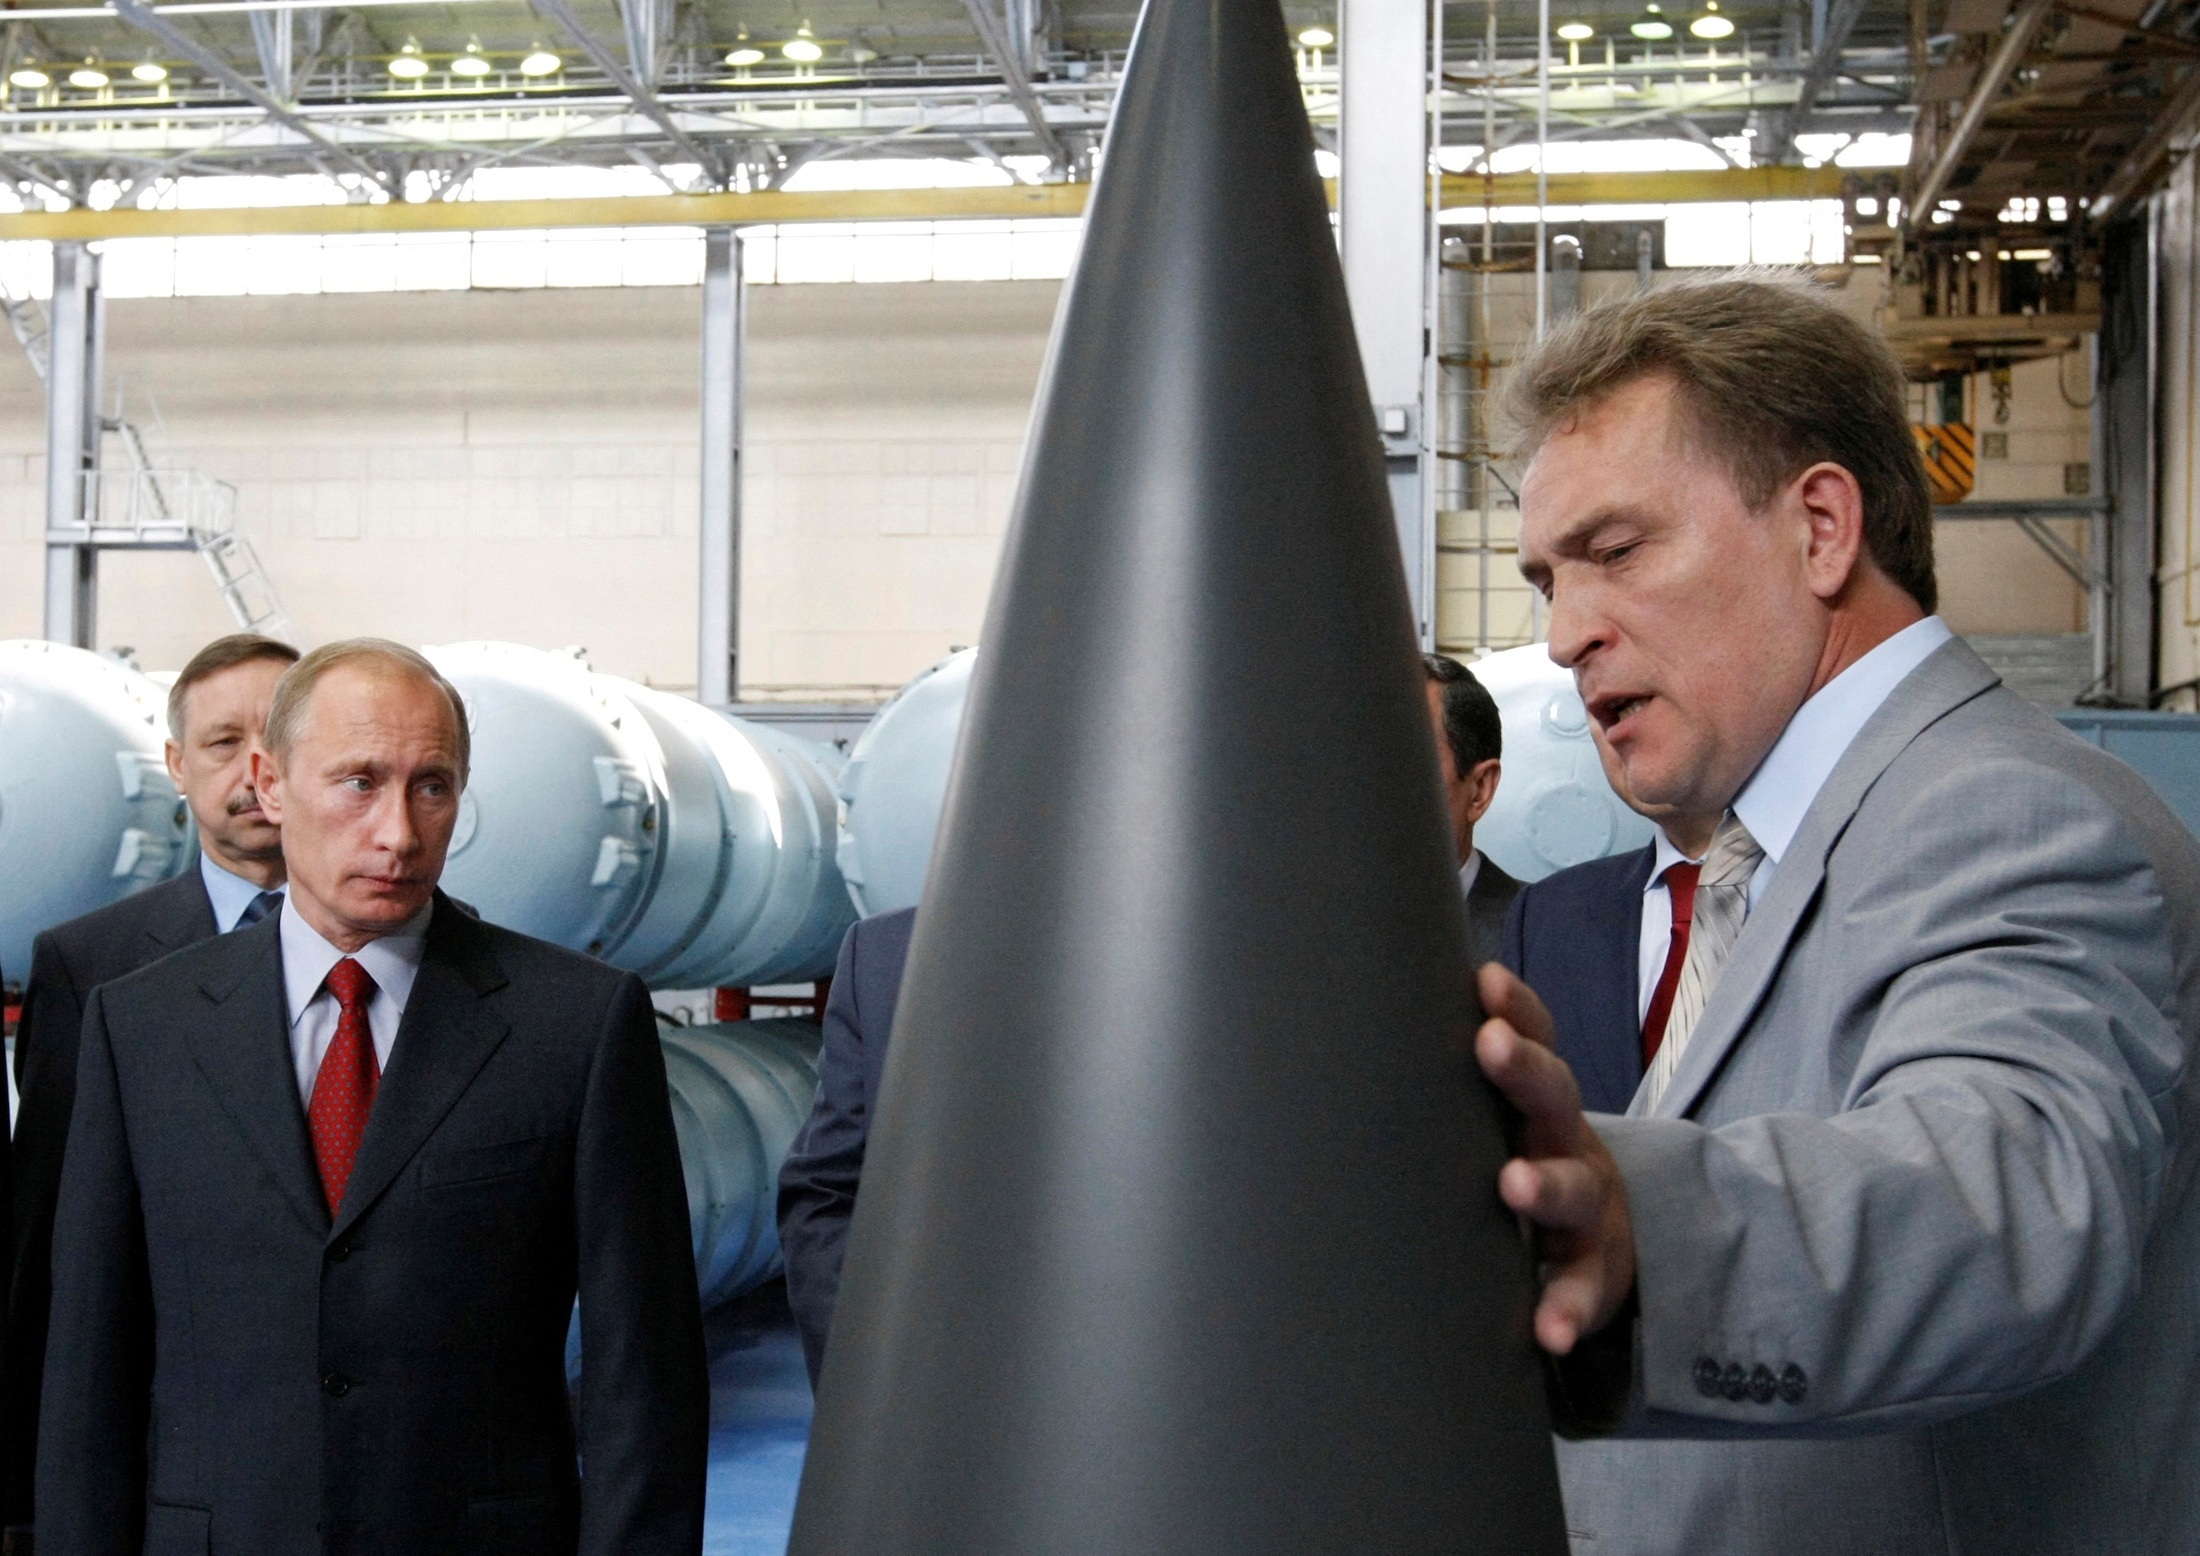 FILE PHOTO: Russian Prime Minister Vladimir Putin listens to the chief executive director of the Almaz-Antey Air Defence firm Vladislav Menschikov during a tour of its plant in Moscow, July 28, 2008. REUTERS/RIA Novosti